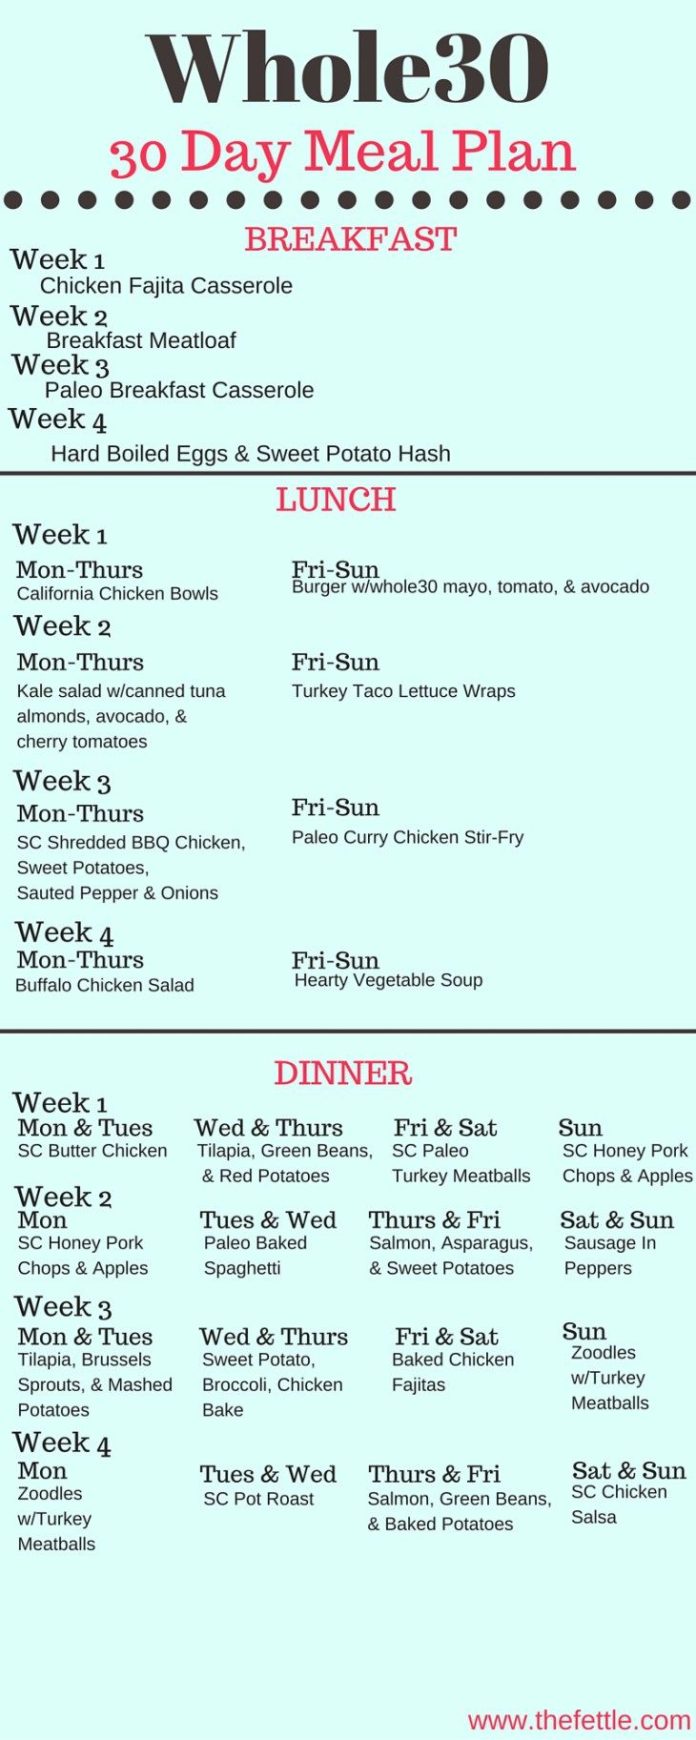 Diet Plan To Lose Weight The Whole30 Meal Plan 30 Days Of Meals The